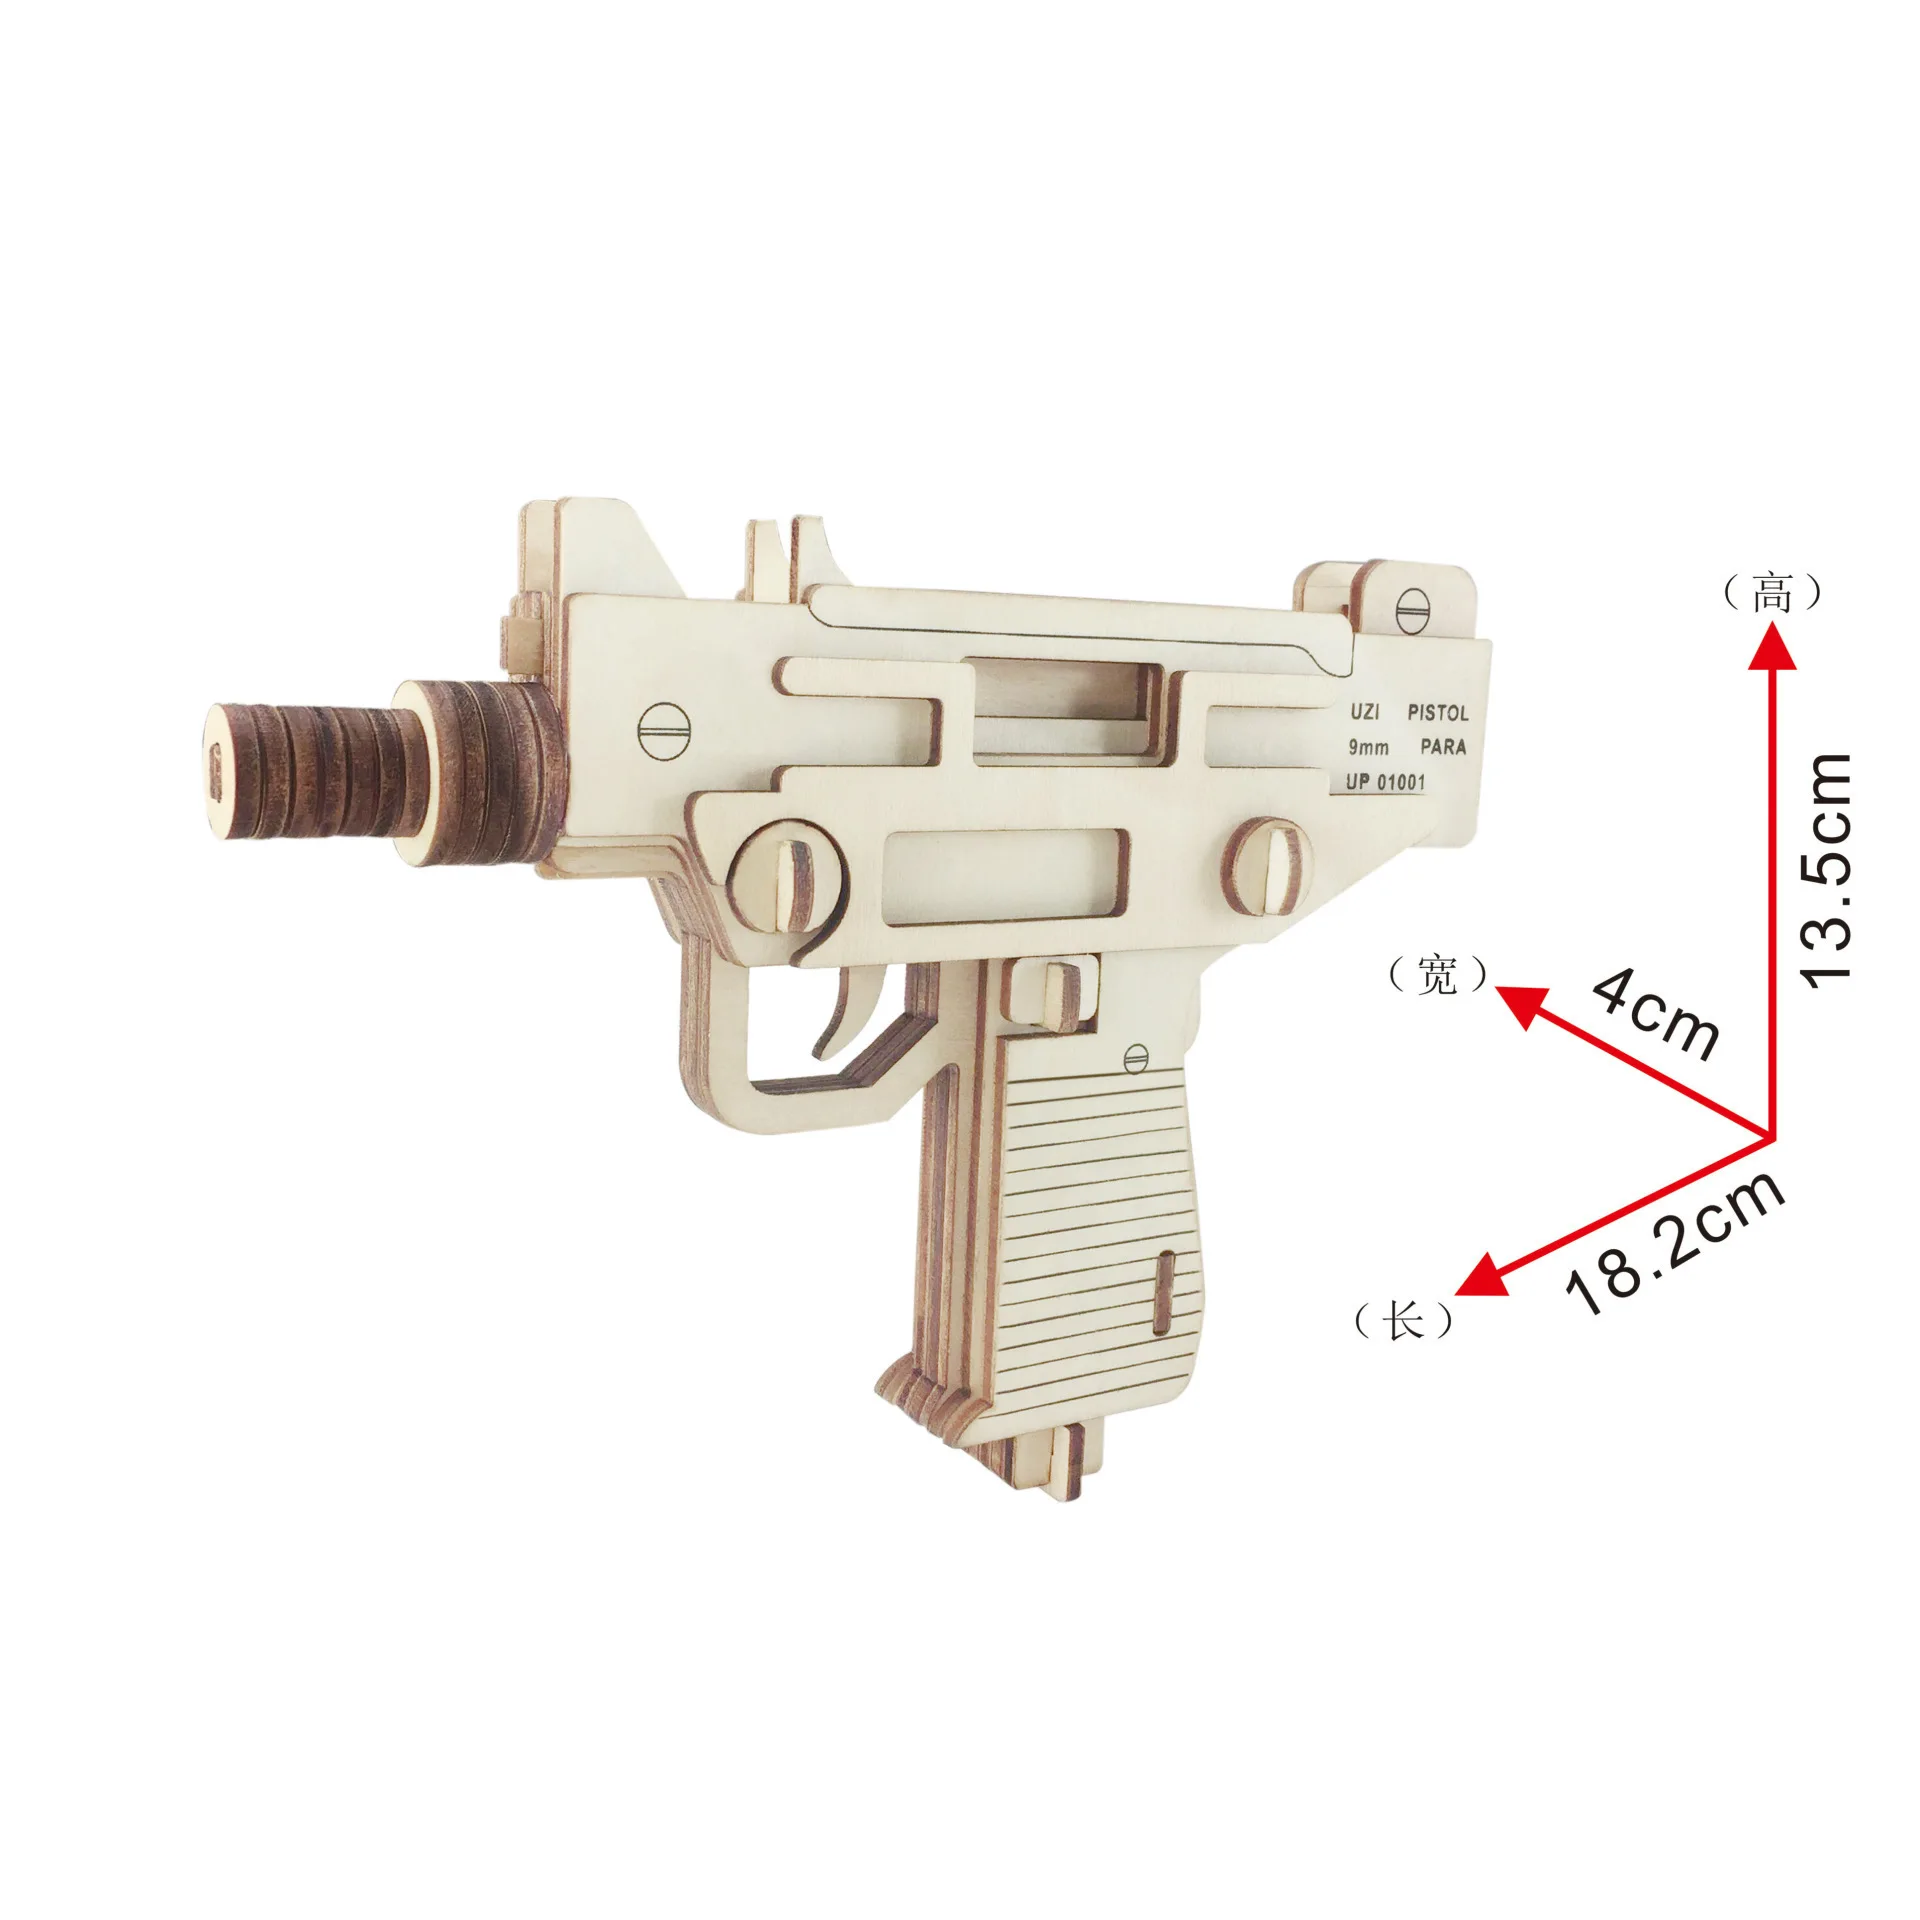 

P103 Laser Cut 3D Jigsaw Puzzle Military Wooden Weapon toy Pistol Uzi DIY Assembly Educational Children Wooden Toys For Boys